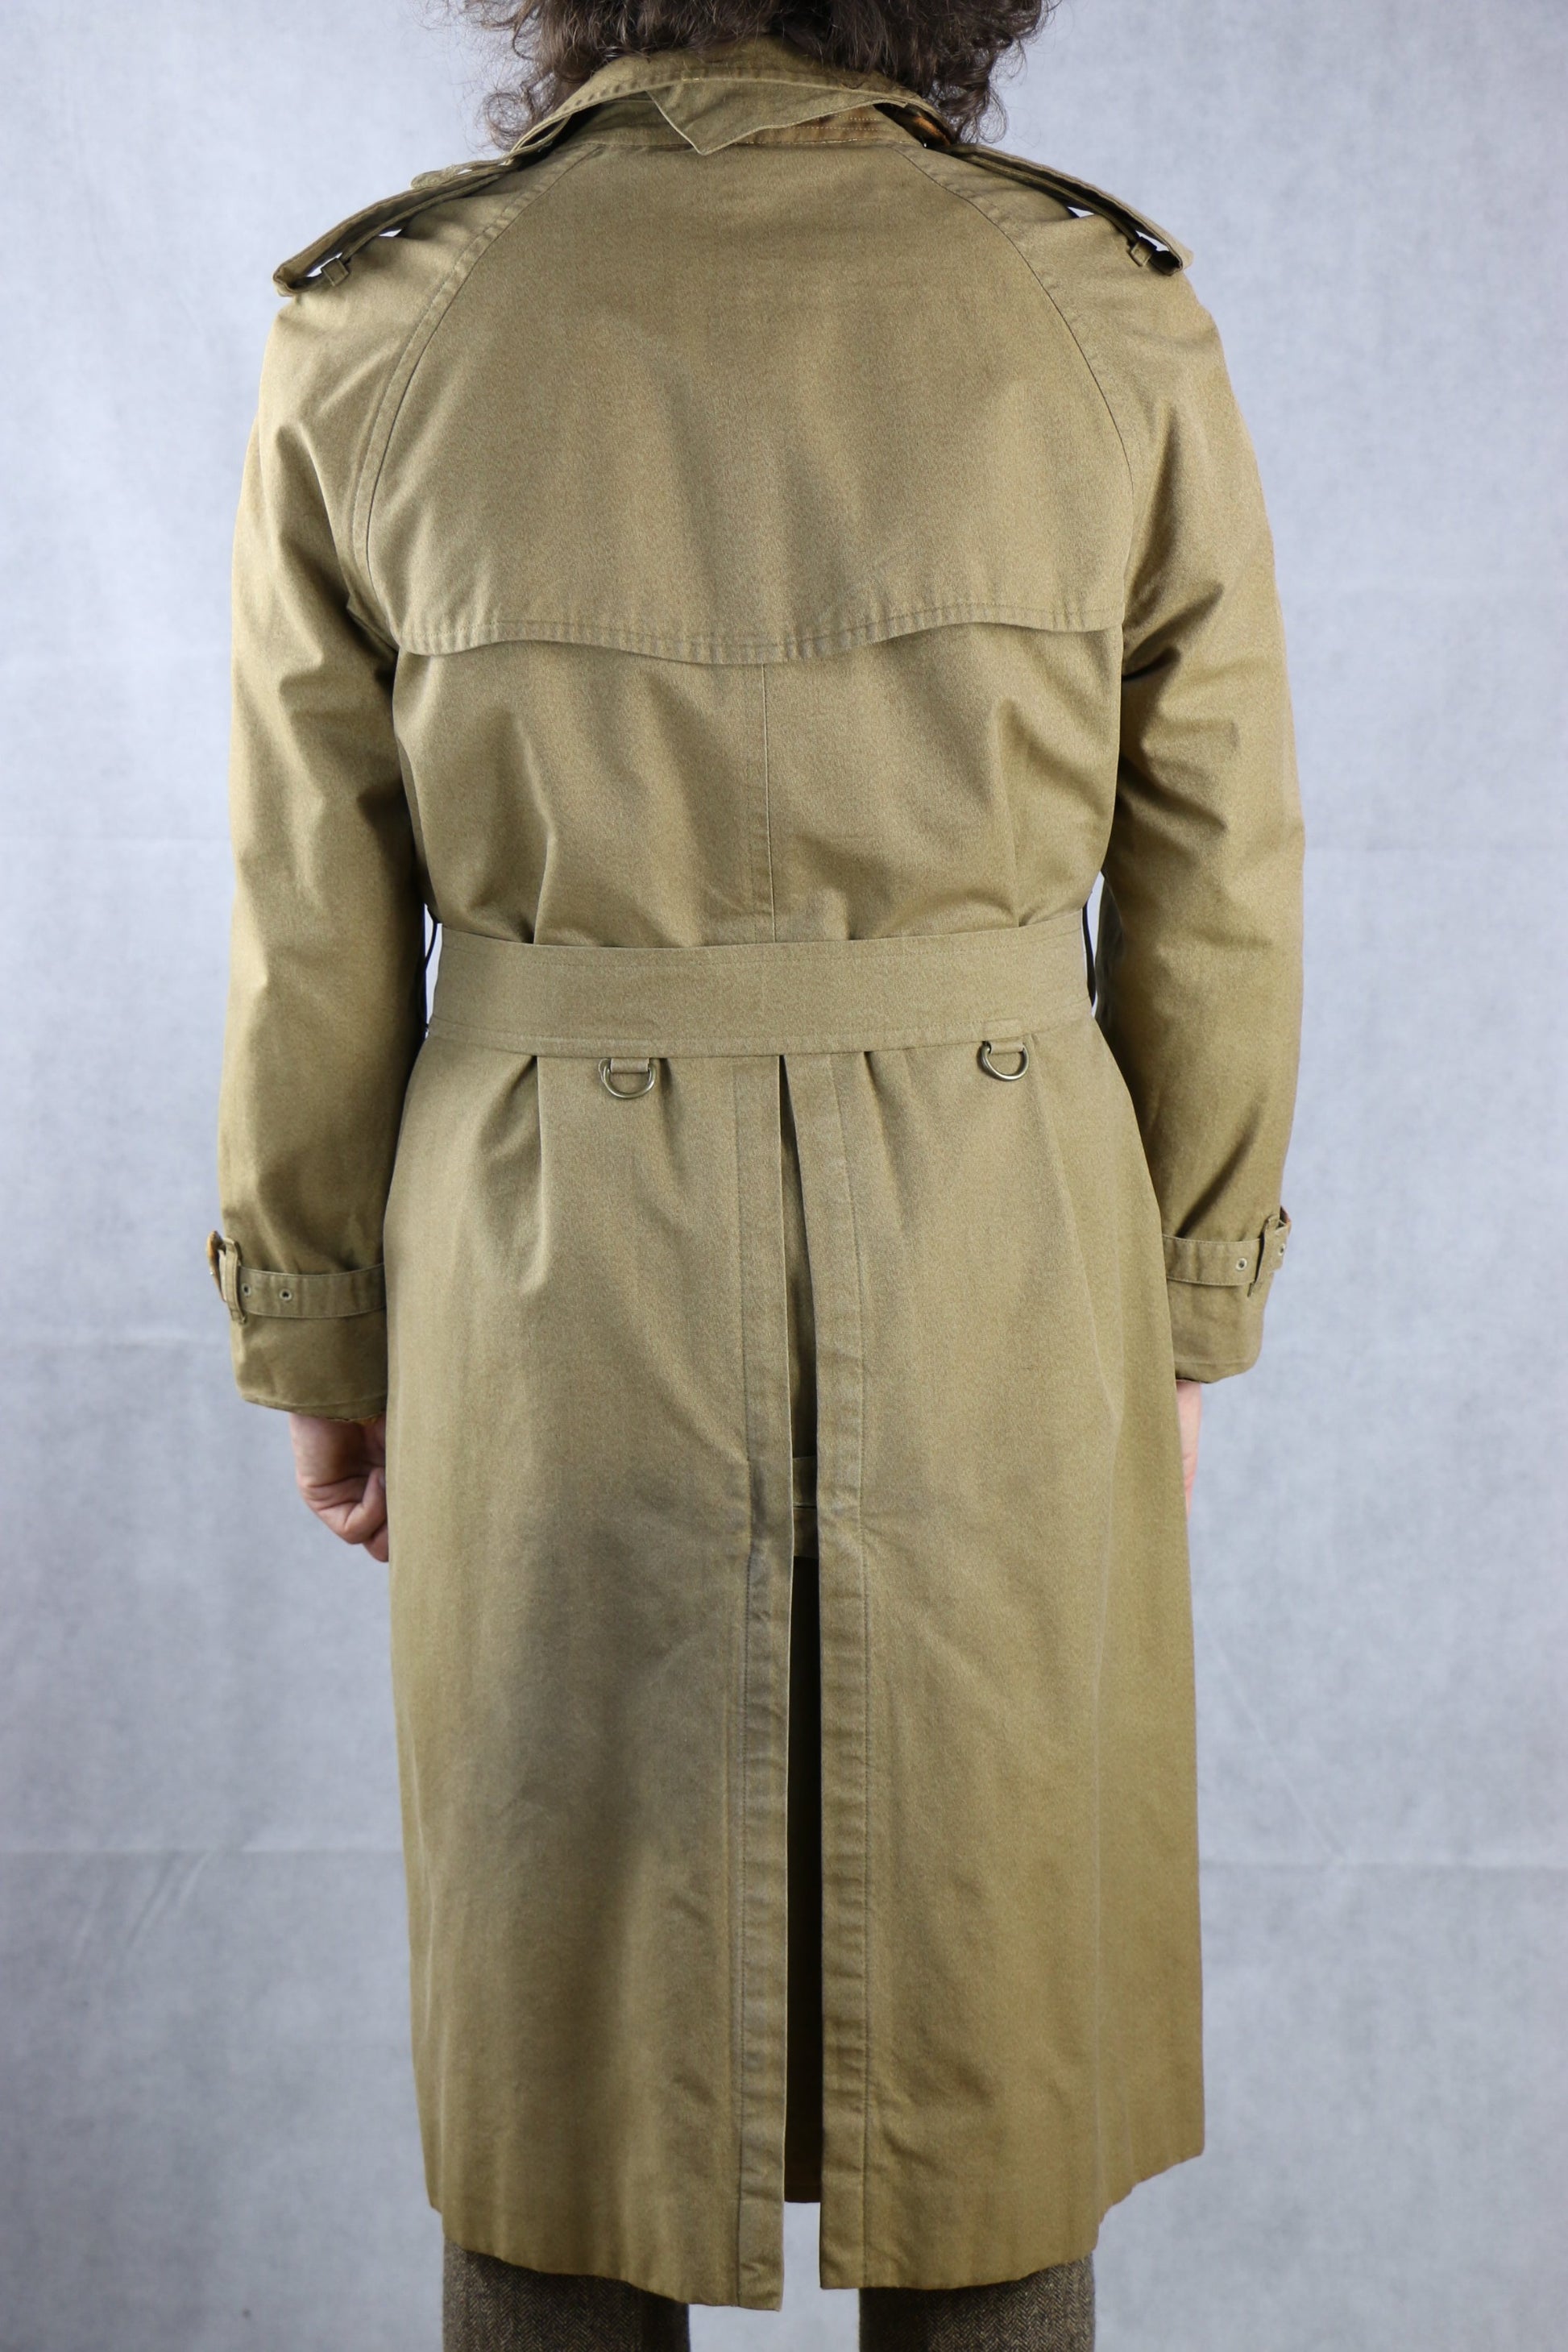 Burberry's Made in England Trench Coat, clochard92.com